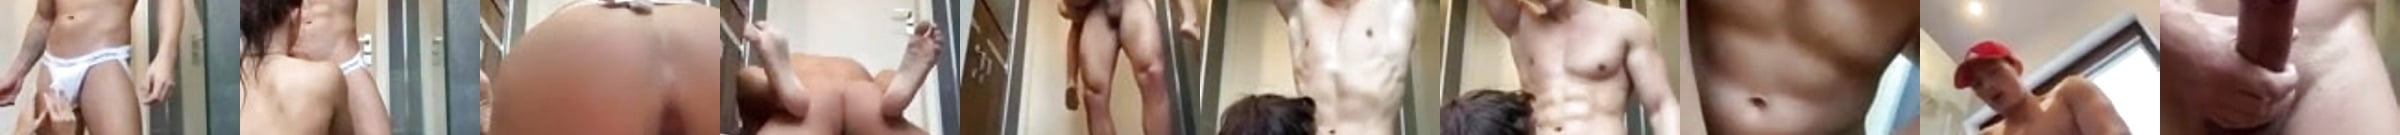 Muscular Stud Fucking His Girlfriend On The Weekend XHamster